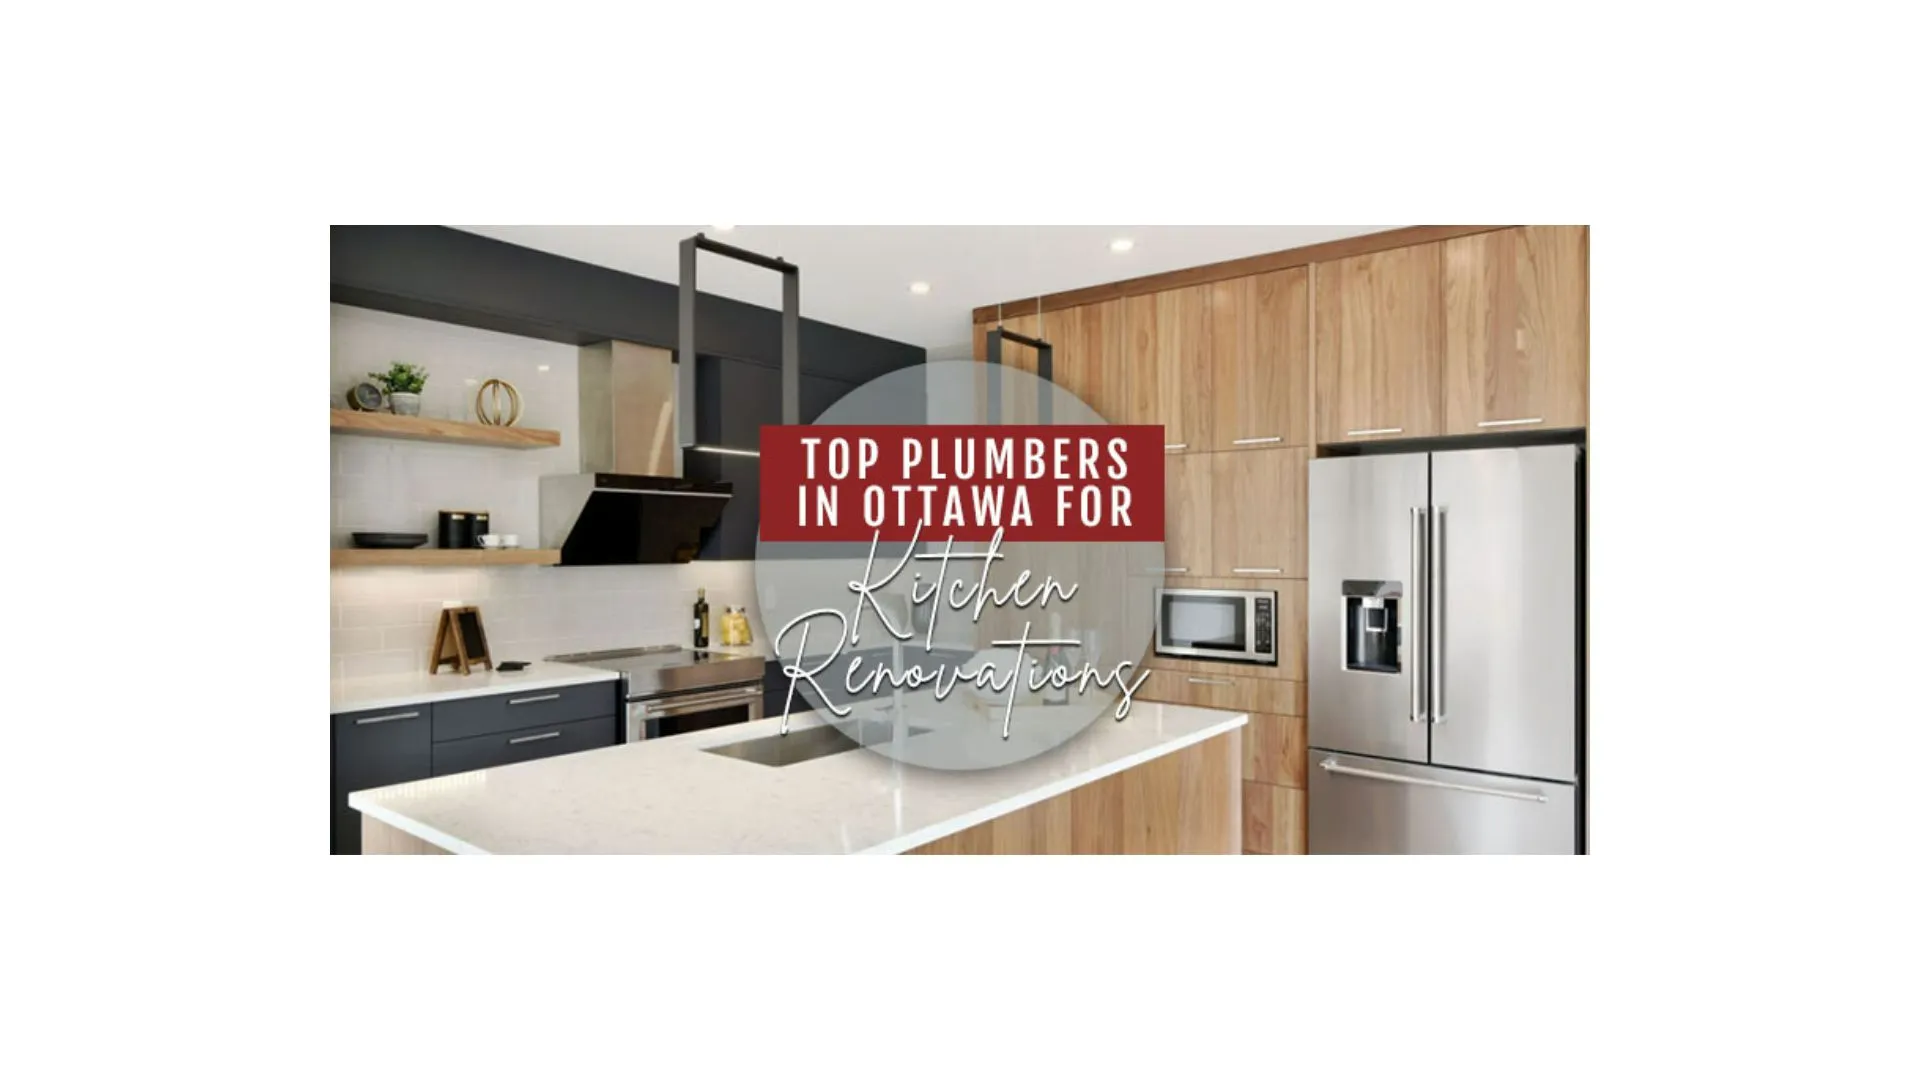 Top 5 Plumbers in Ottawa for Kitchen Renovations Featured Images